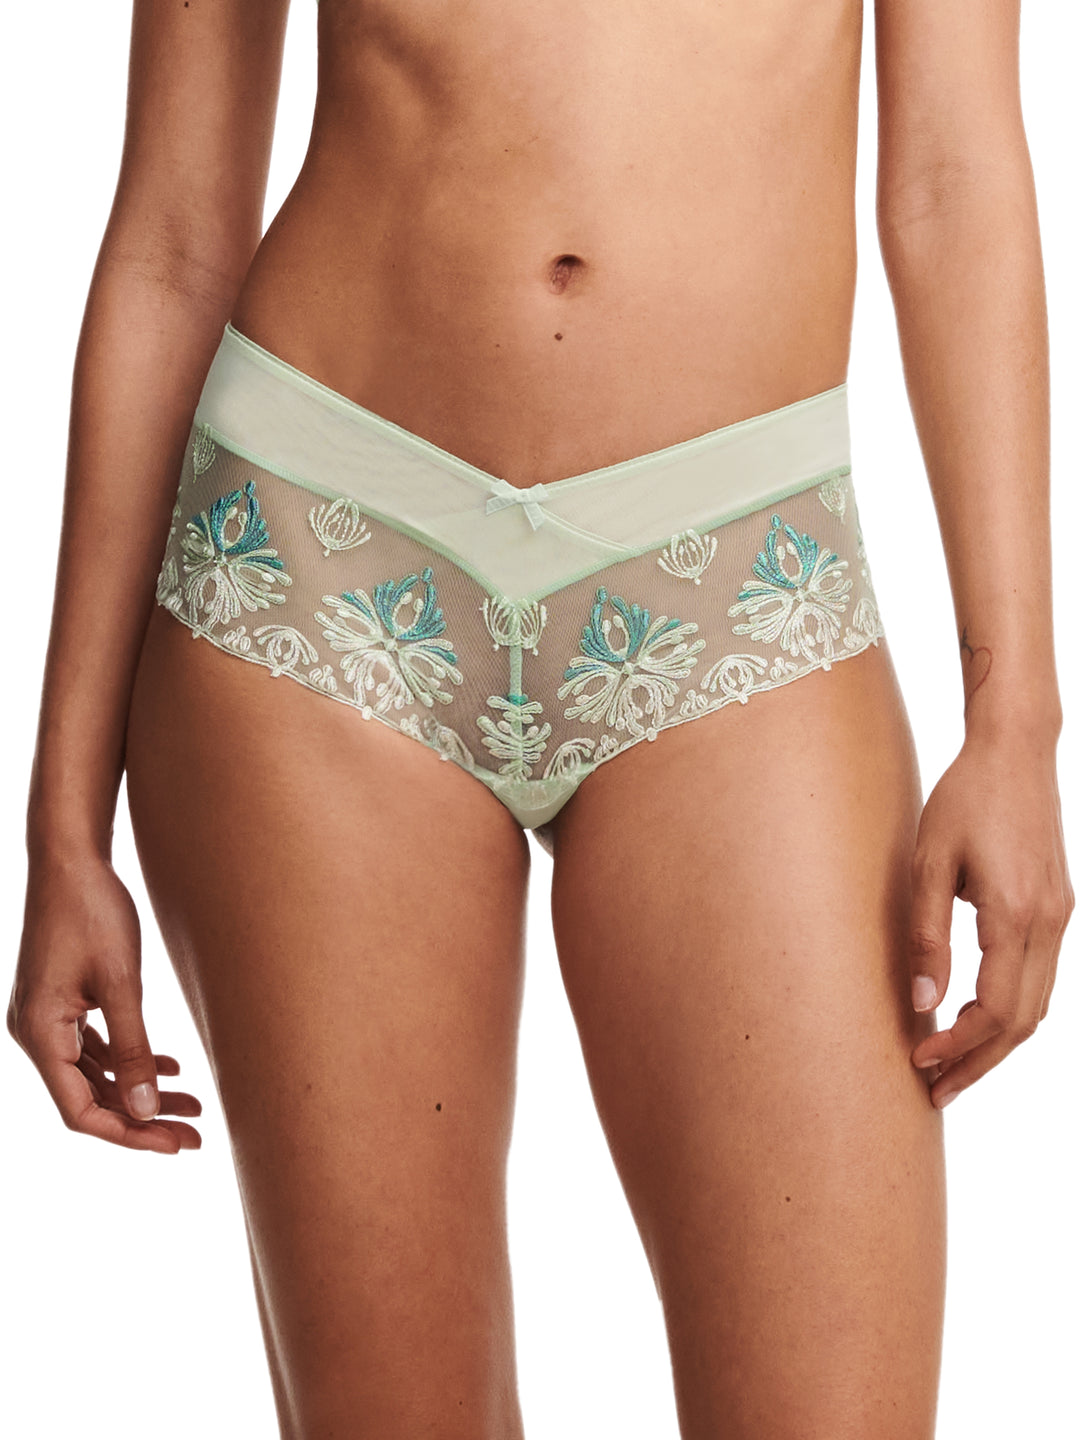 Chantelle - Champs Elysees Shorty Verde Giglio Multicolor